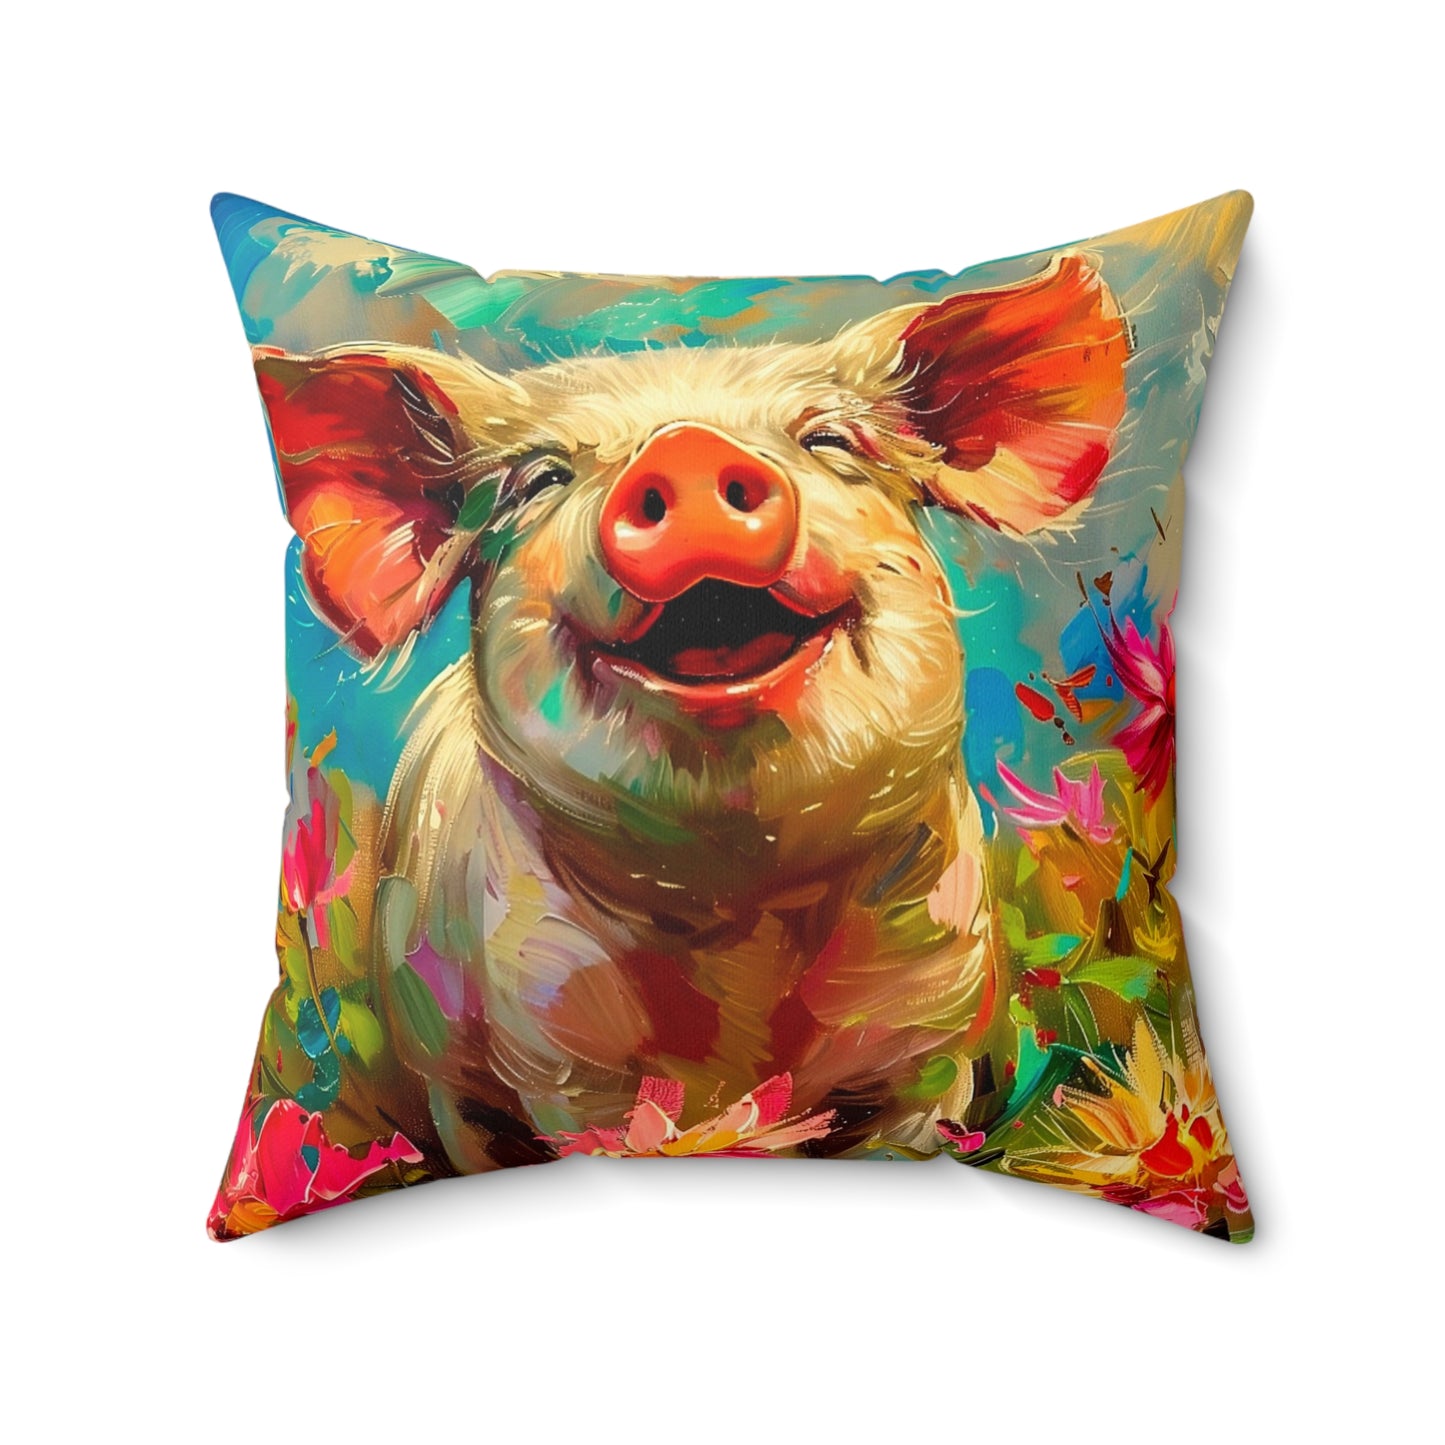 Faux Suede Square Pillow: Pig Art in Spring Flowers-Pig